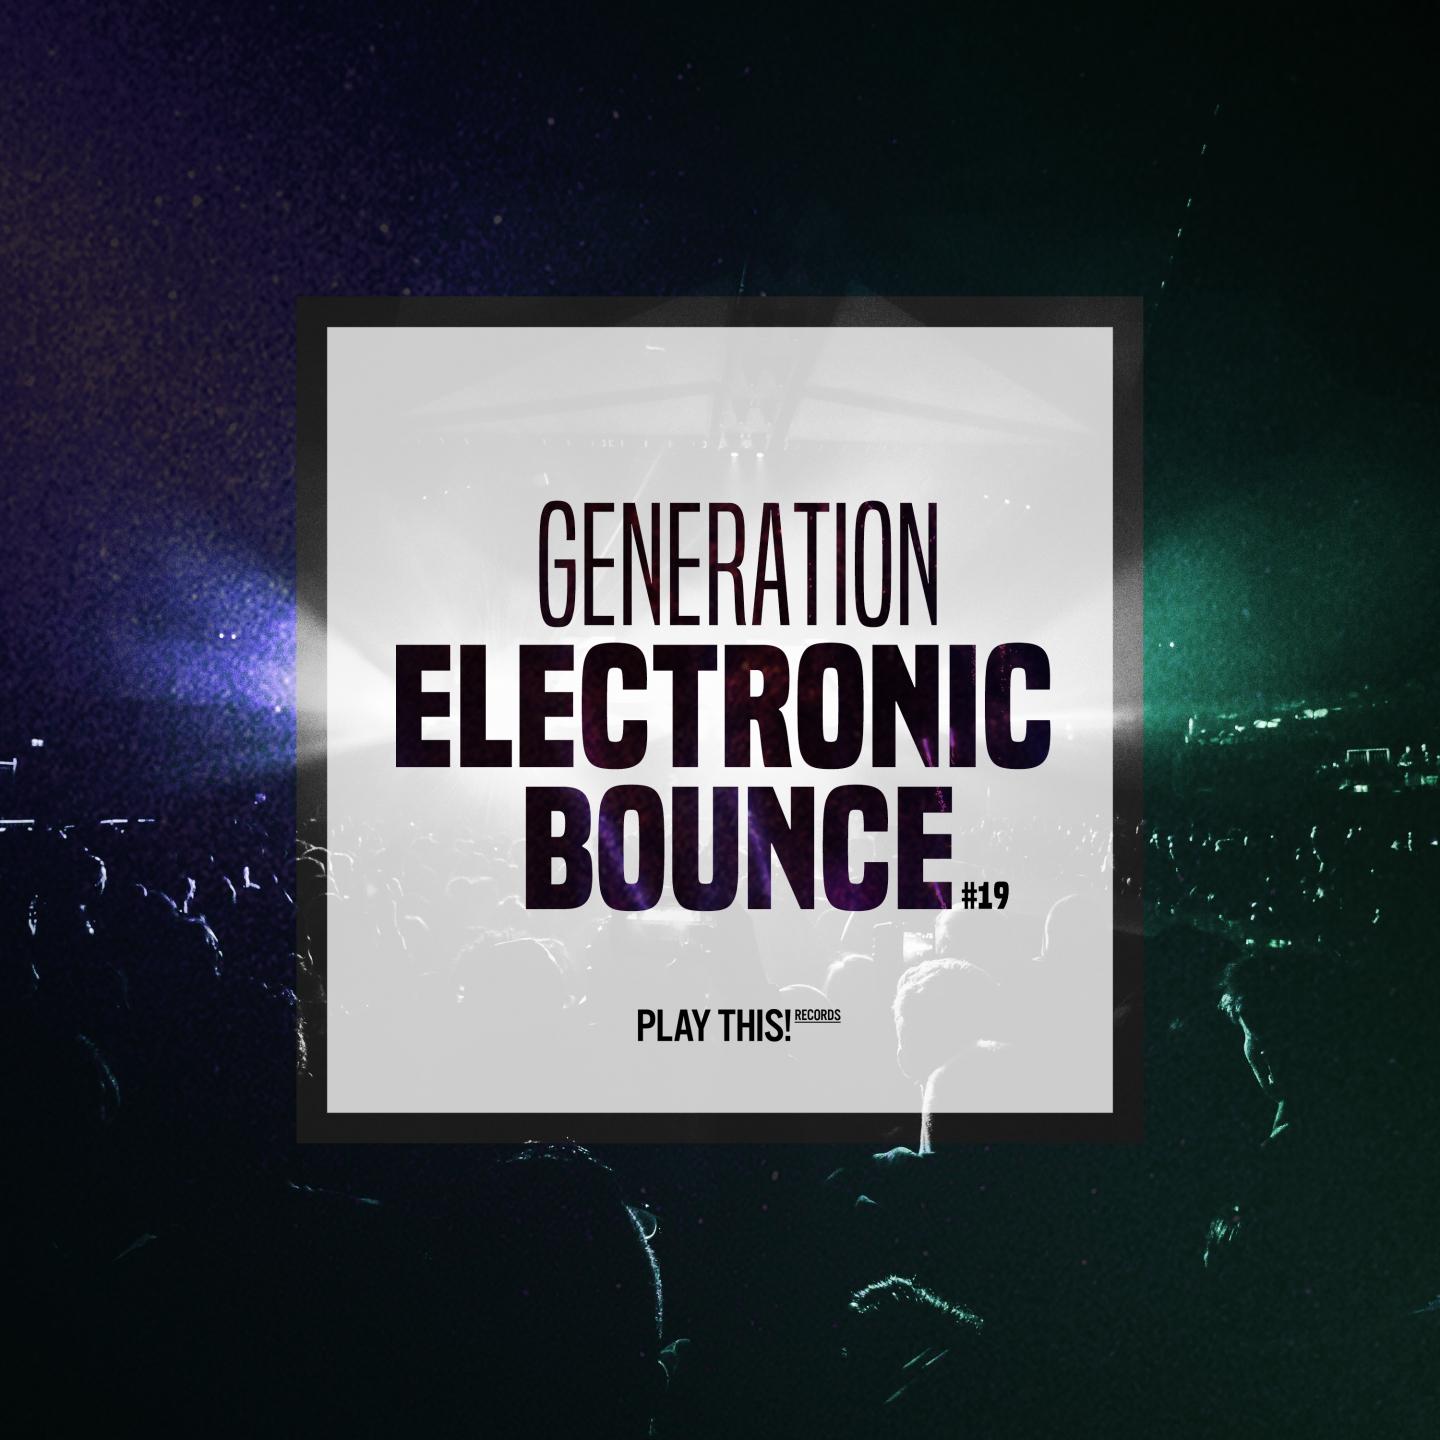 Generation Electronic Bounce, Vol. 19